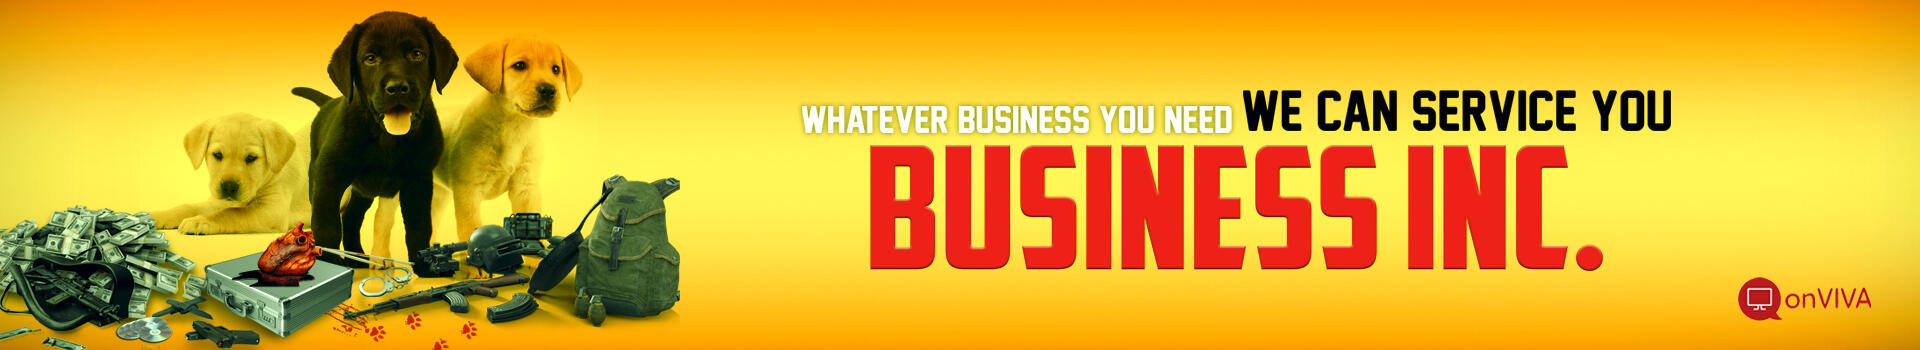 Business Inc. Yellow Banner